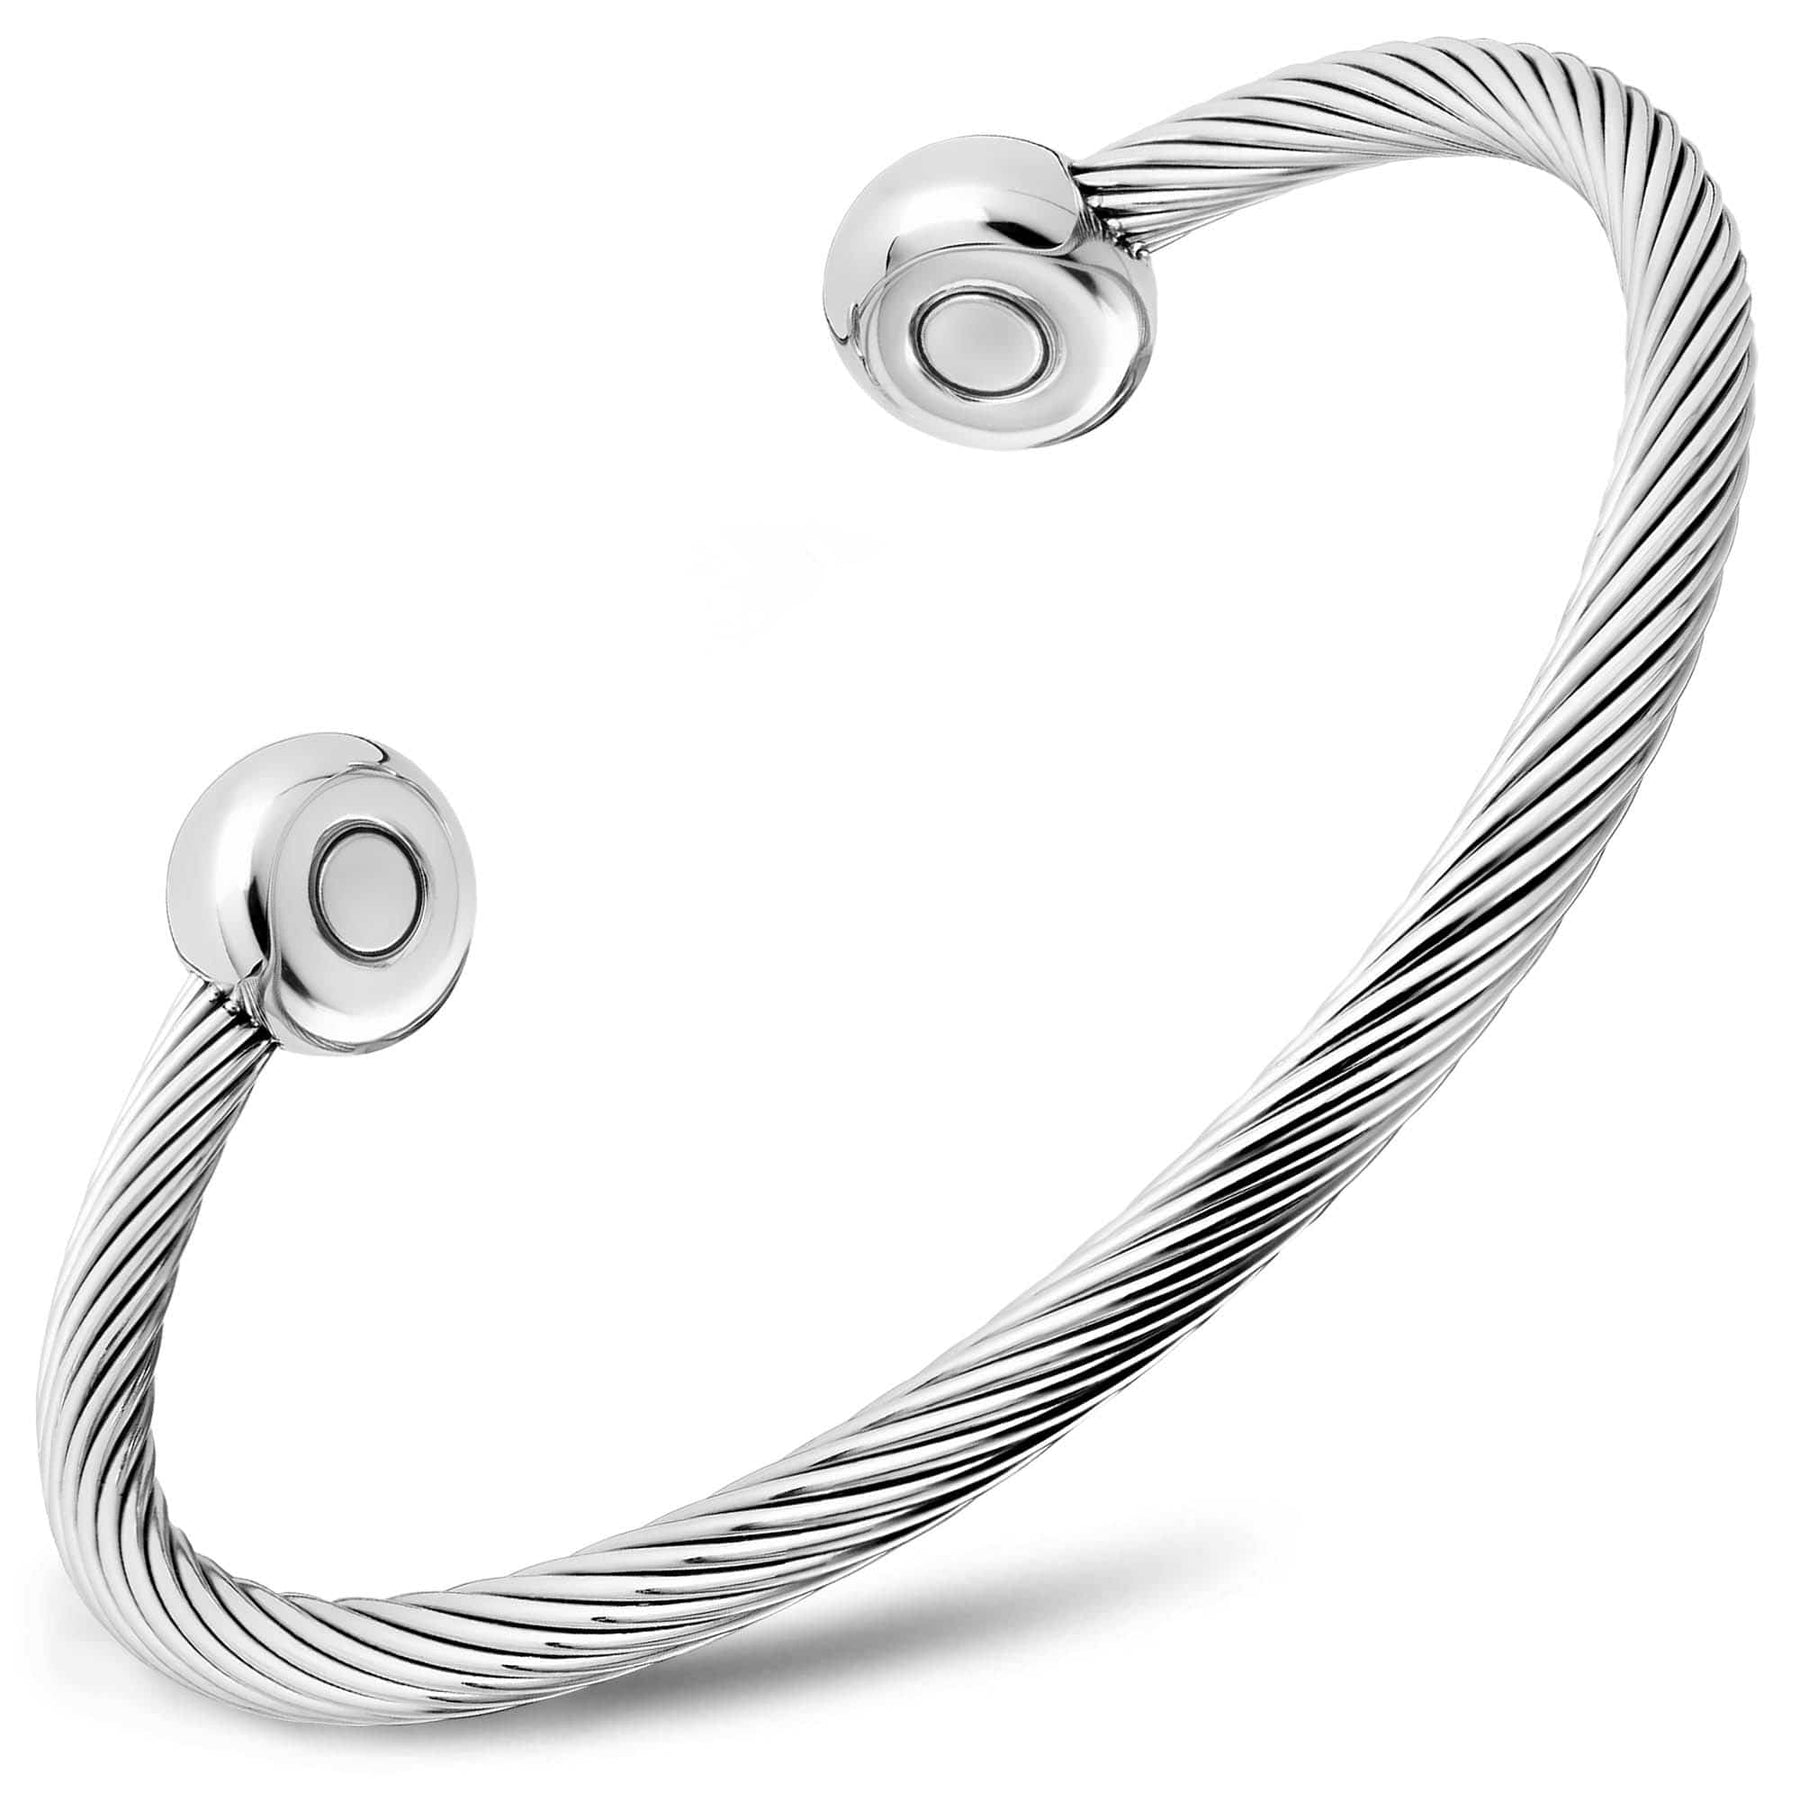 Twisted Cable Magnetic Bracelet Cuff (Silver)